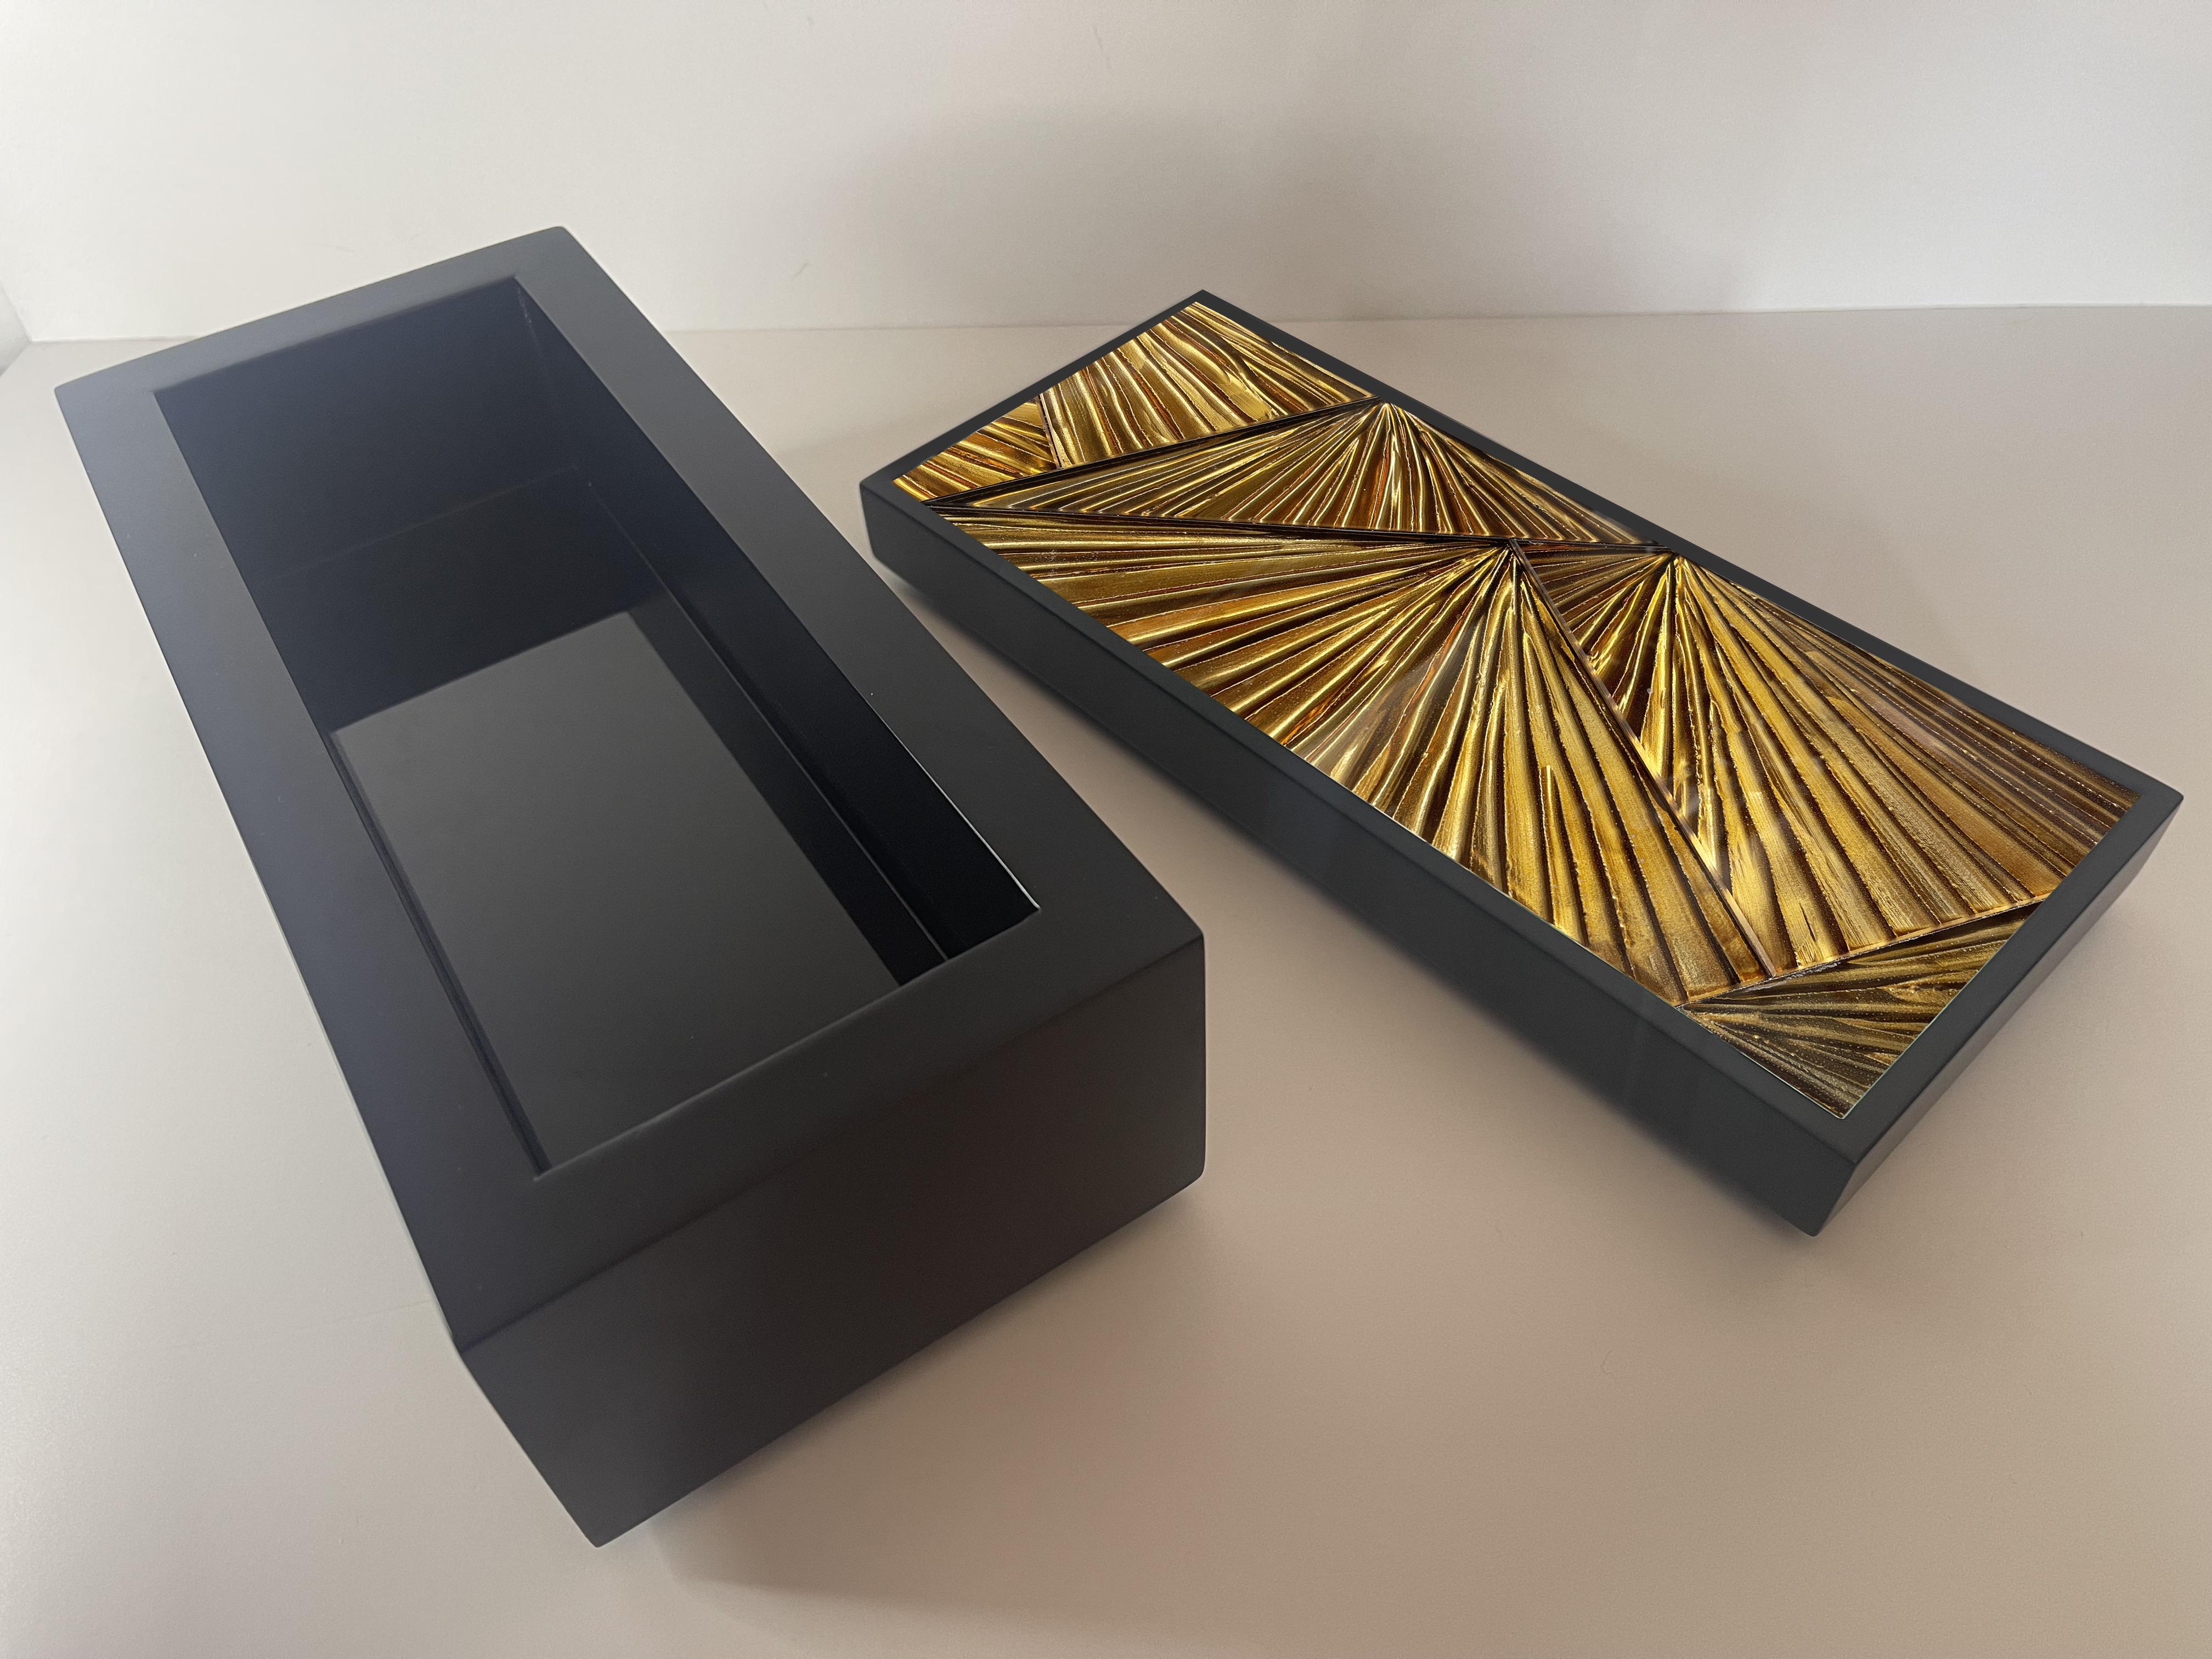 Italian Contemporary Jewelry Box Handmade Black Wood and Engraved Glass by Ghirò Studio For Sale